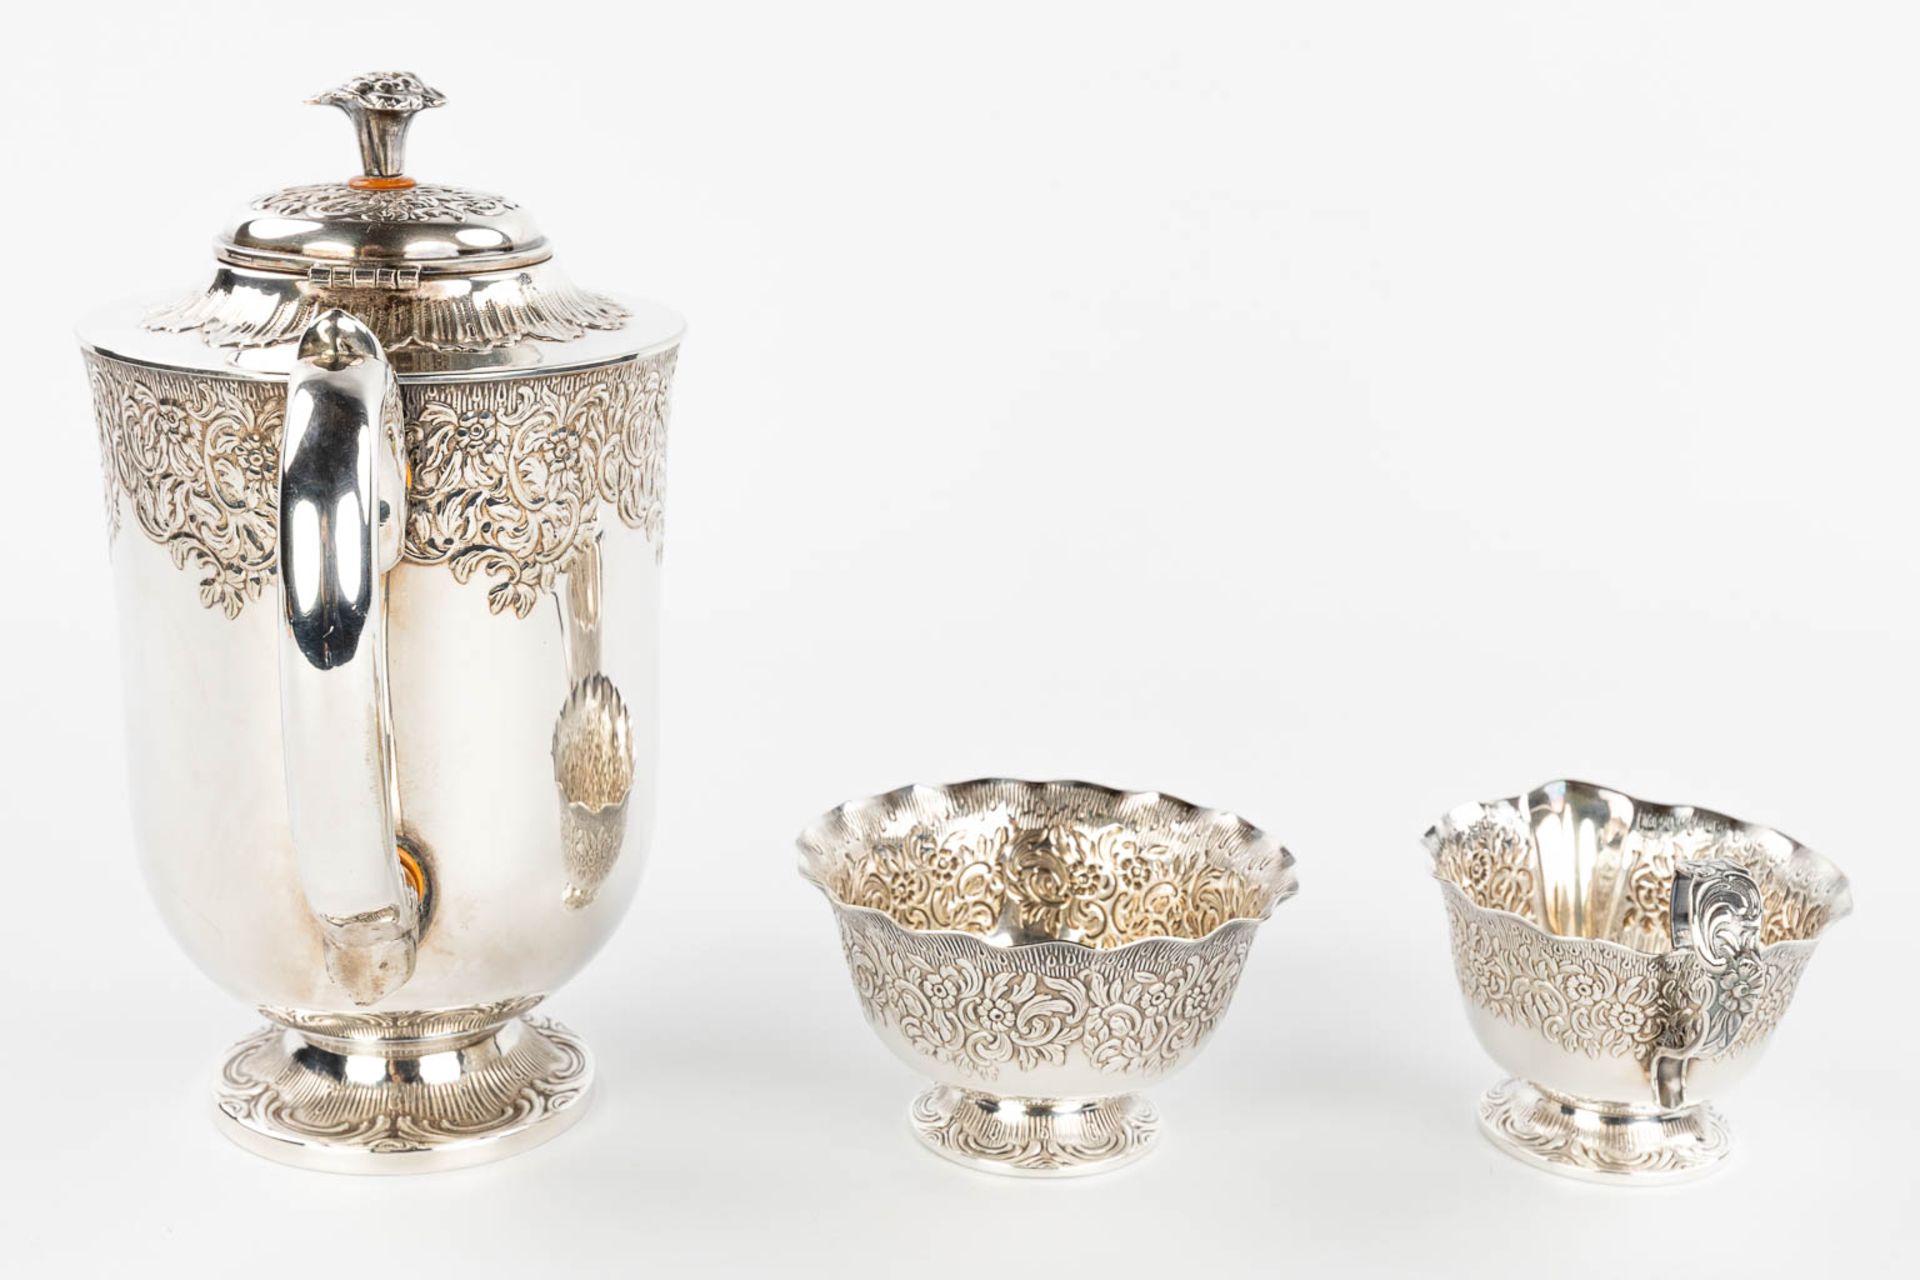 A silver-plated coffee service on a platter with sugar pot, coffee pot and milk jug. (H:22cm) - Image 9 of 18